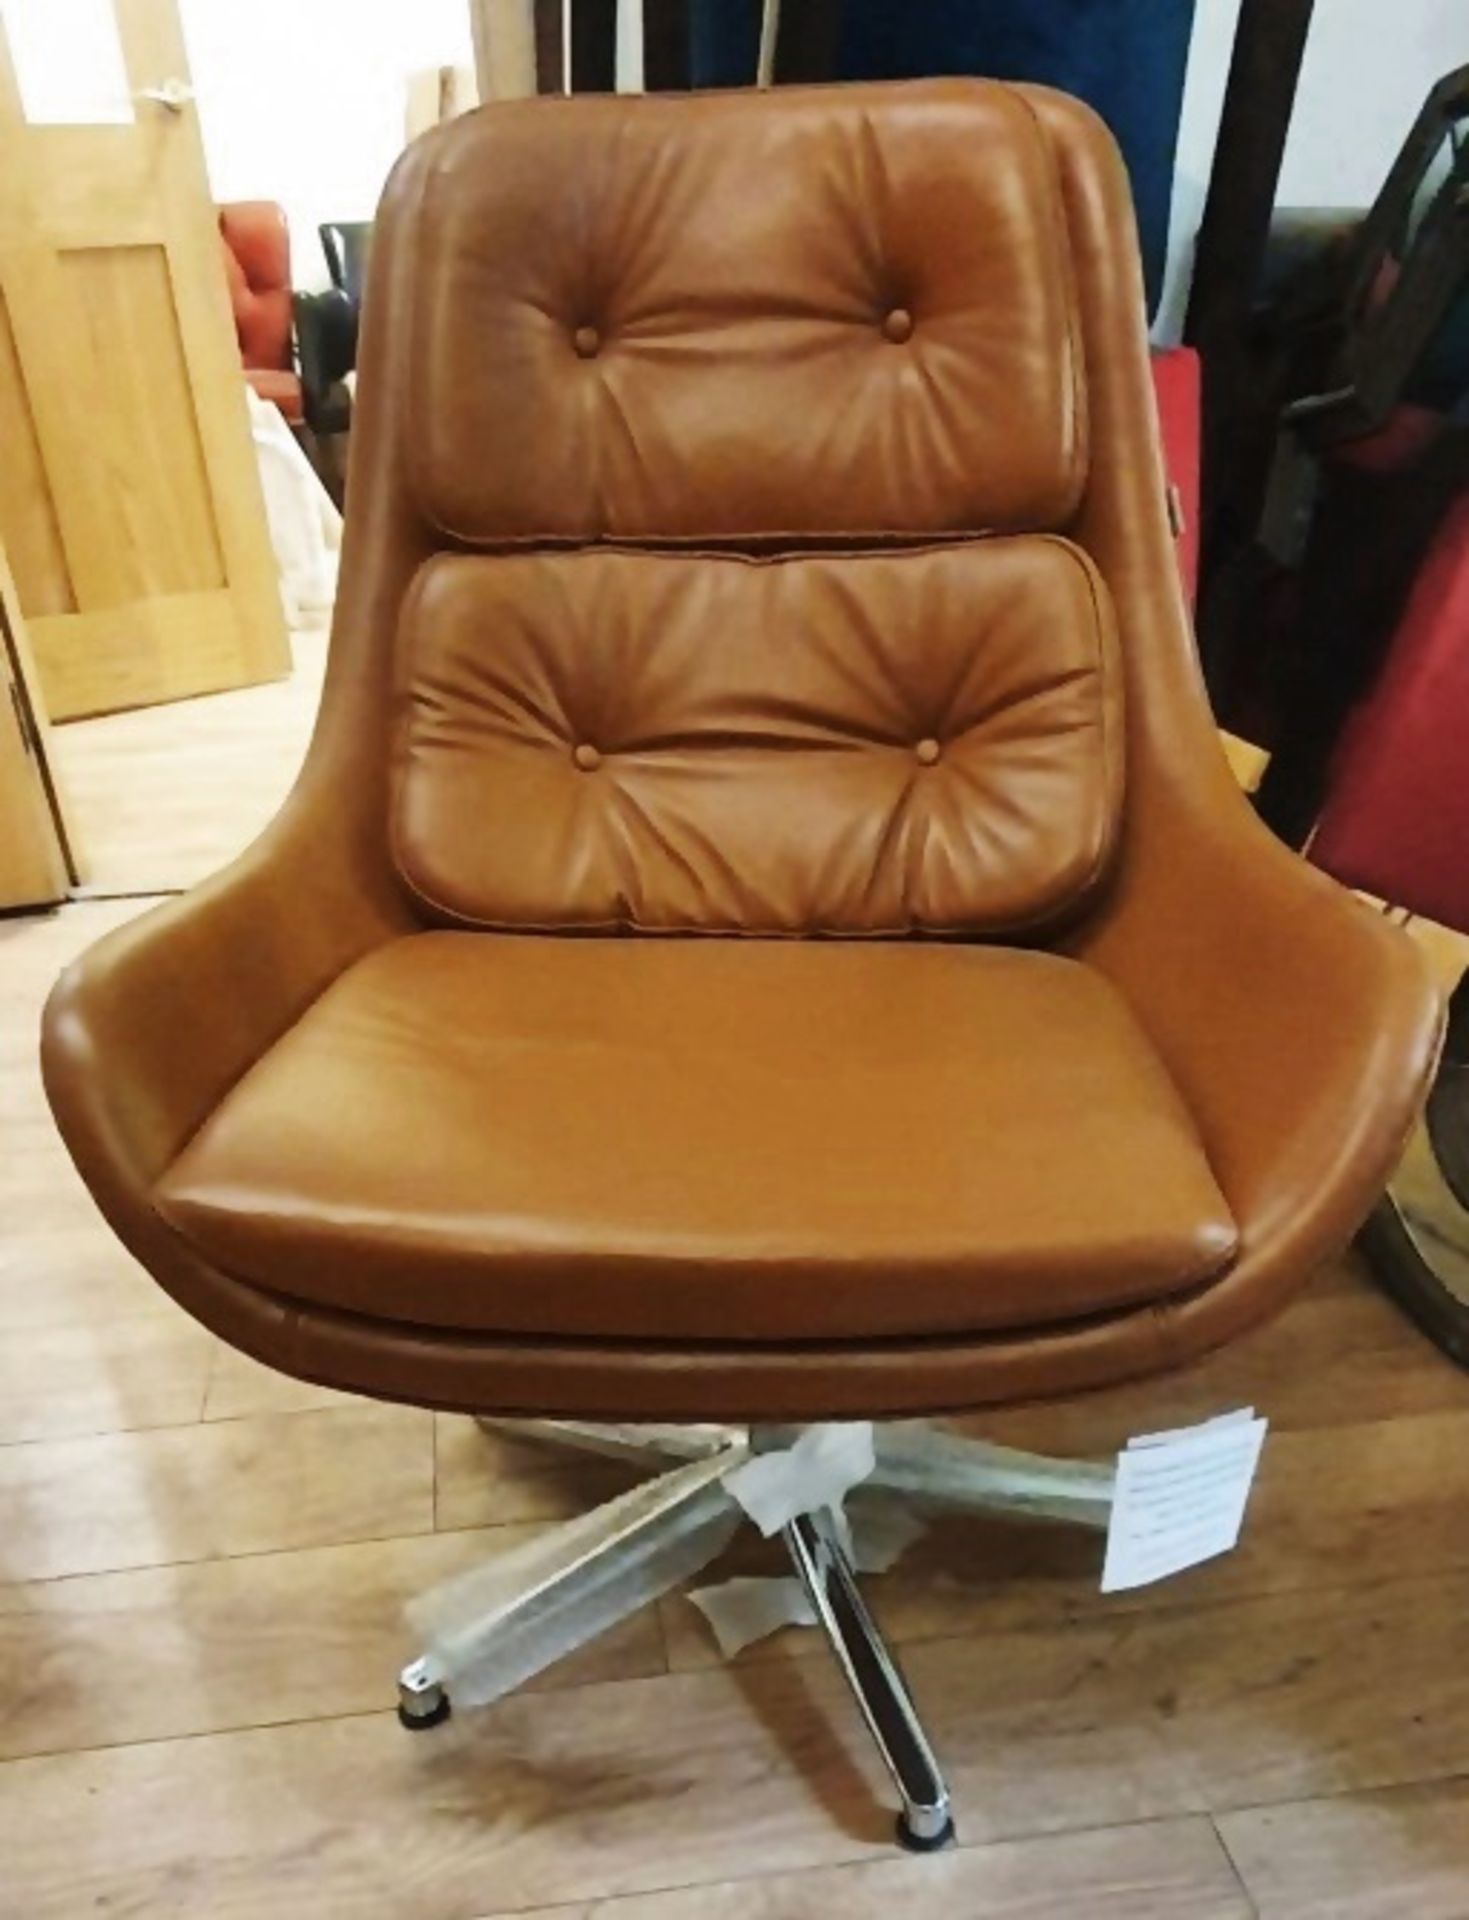 1 x STEIJER 'Super Easy' Designer Swivel Lounge Chair In Tan - Ex-Display Example - Image 2 of 6